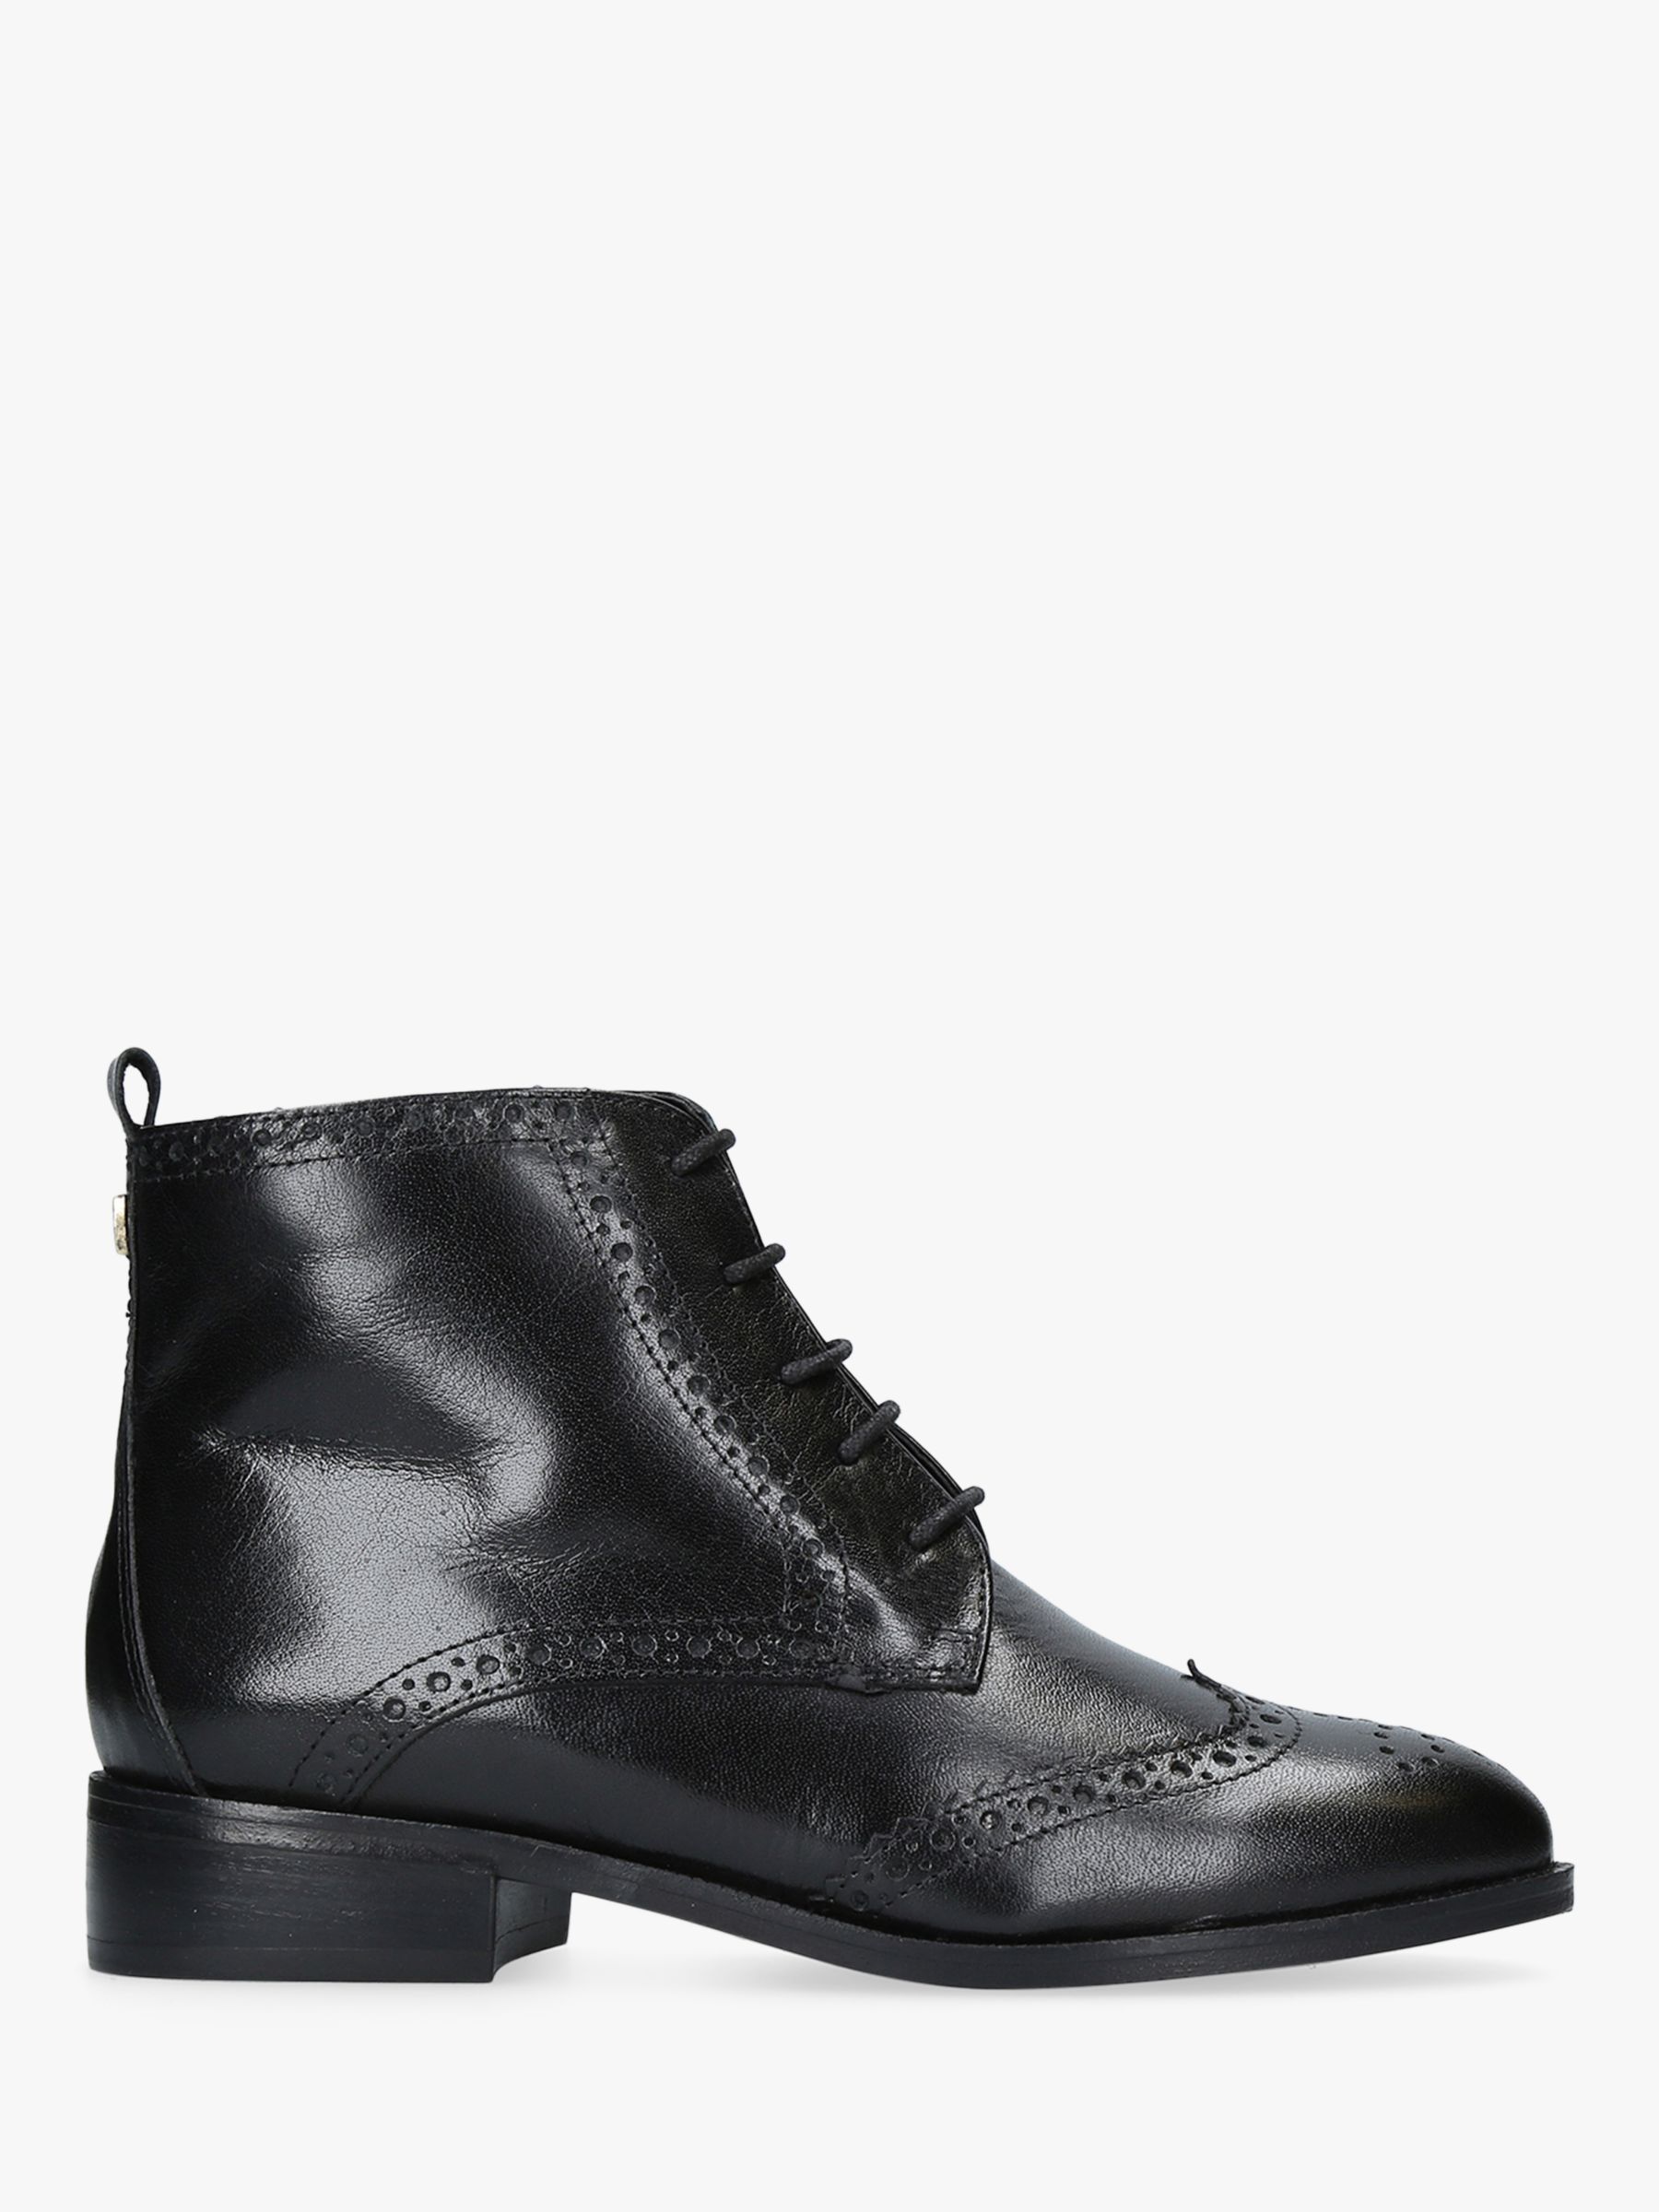 Carvela Toby Lace Up Brogue Ankle Boots